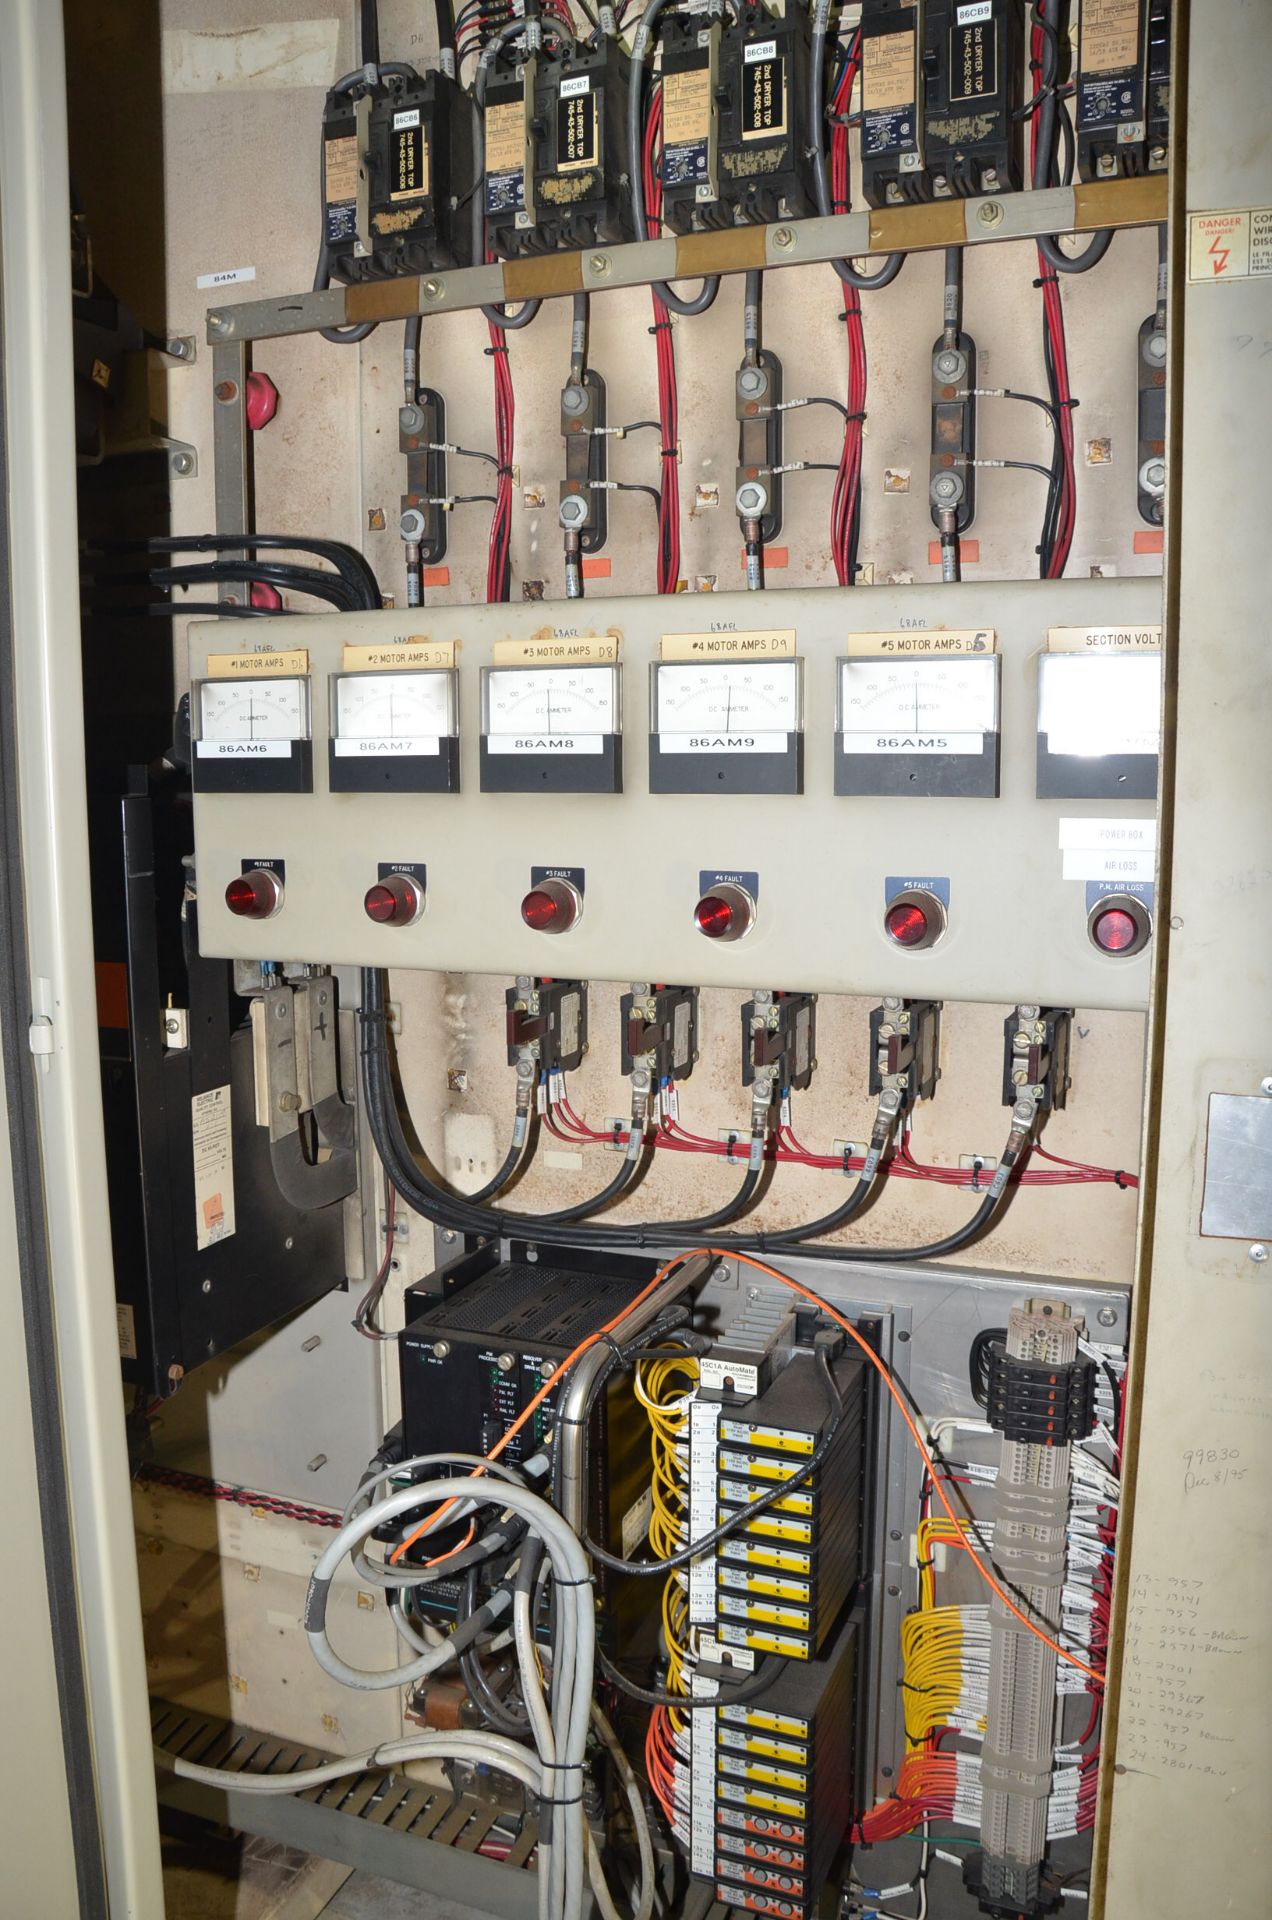 LOT/ PM5 DRIVE ROOM CABINETS CONSISTING OF 6-BANK CONTROL CABINETS WITH REMAINING COMPONENTS [ - Image 4 of 6